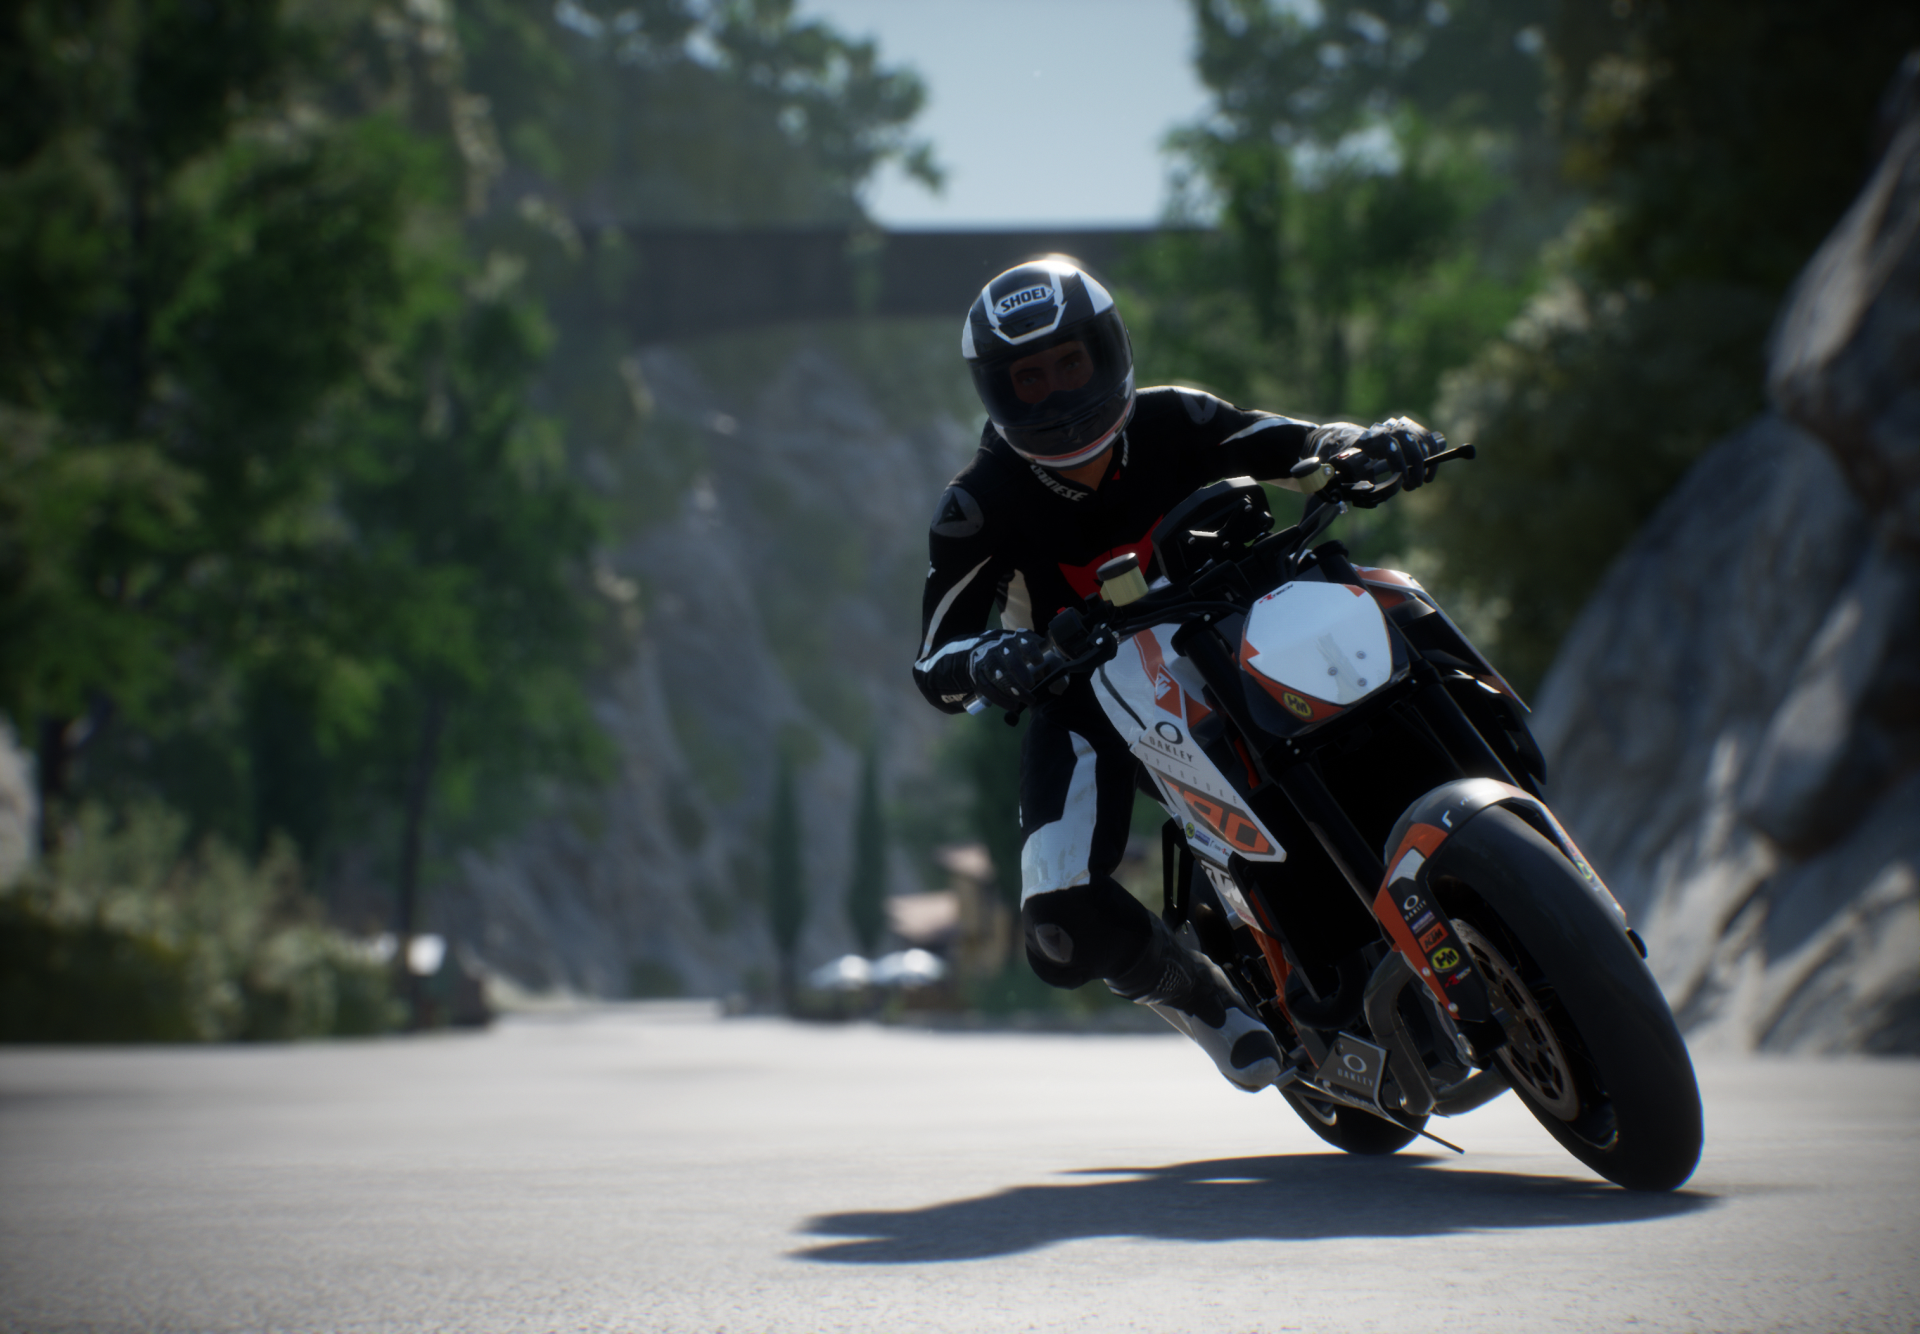 RIDE 3 PS4 Review #31